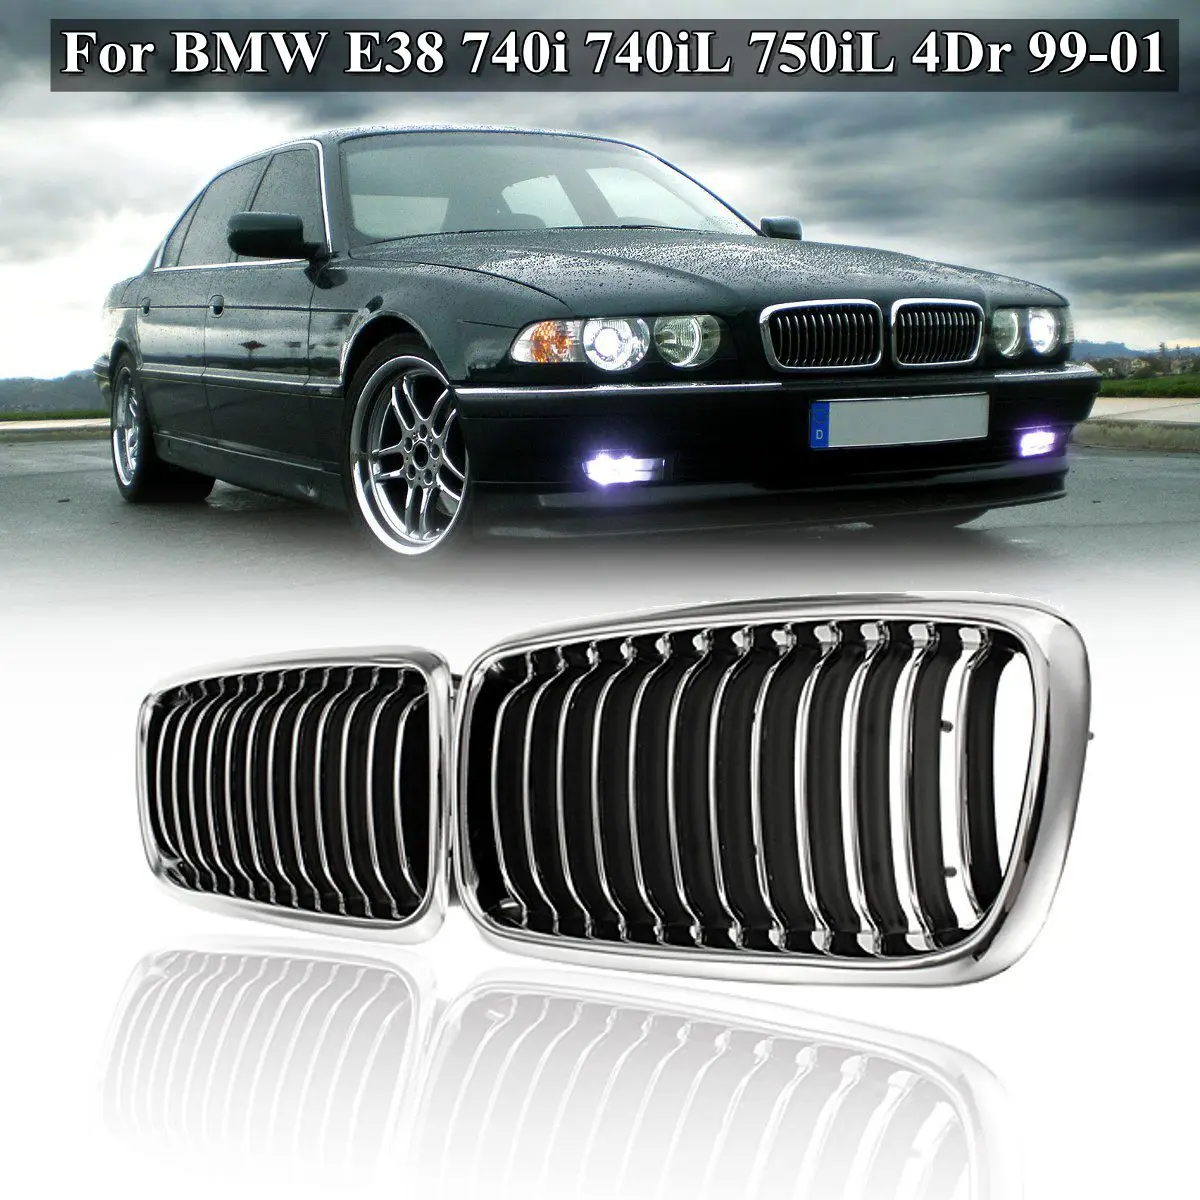 Chrome Front Kidney Grille Compatible with 1995-2001 BMW E38 740i 740iL 750iL Sedan 4 Door 